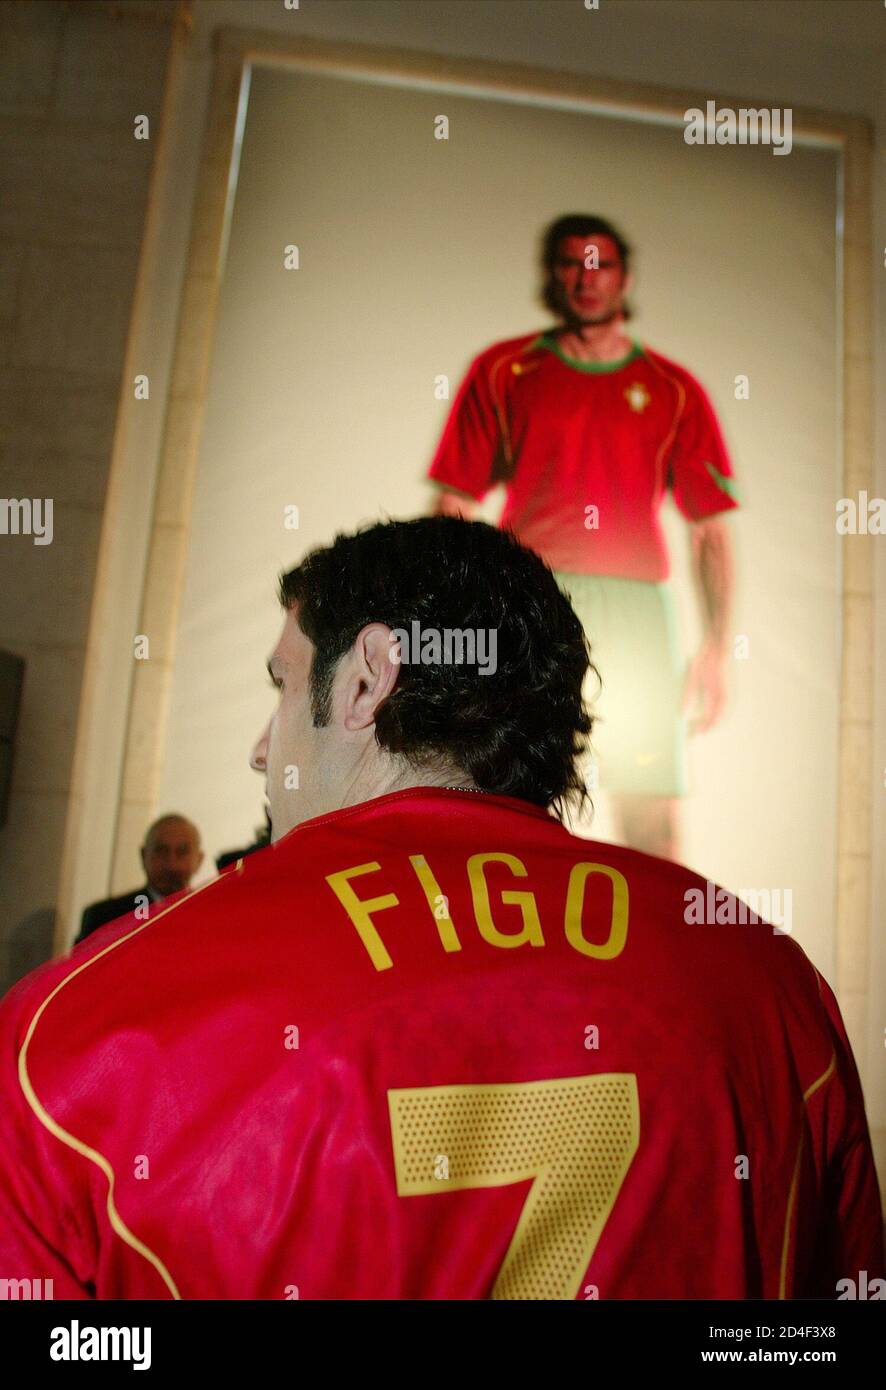 Portuguese Soccer player Luis Figo shows journalists the new national  soccer team jersey during the presentation of the new designer team jersey  at the Nacional stadium in Lisbon February 16, 2004. REUTERS/Nacho